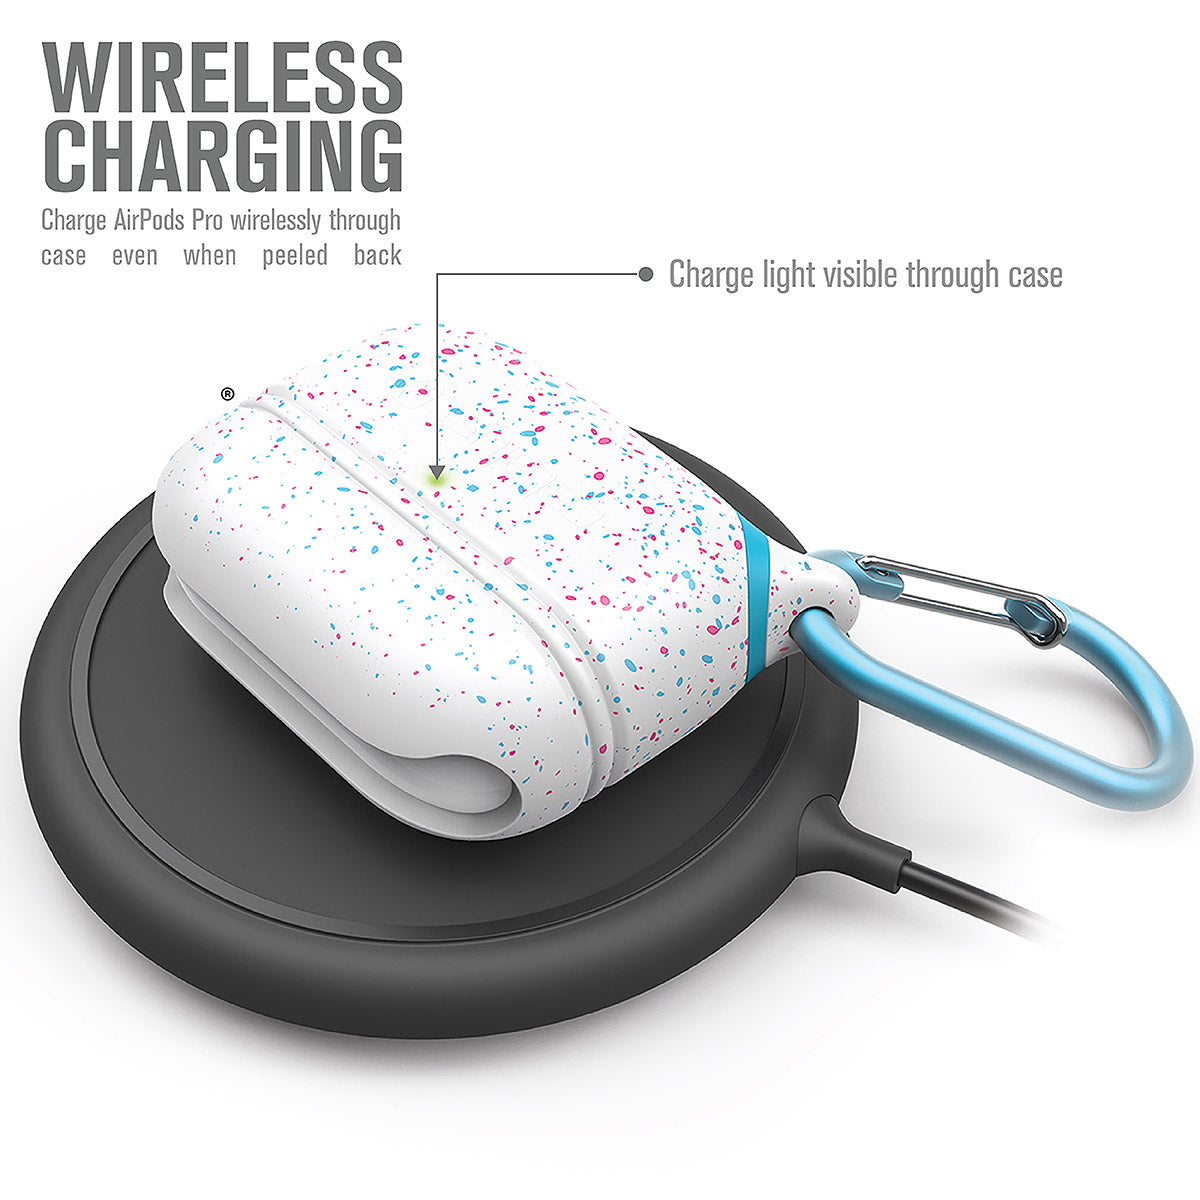 CATAPLAPDPROFUN | catalyst airpods pro gen 2 1 waterproof case carabiner special edition funfetti on top of a wireless charger text reads wireless charging charge airpods pro wirelessly through case even when peeled back charge light visible through case